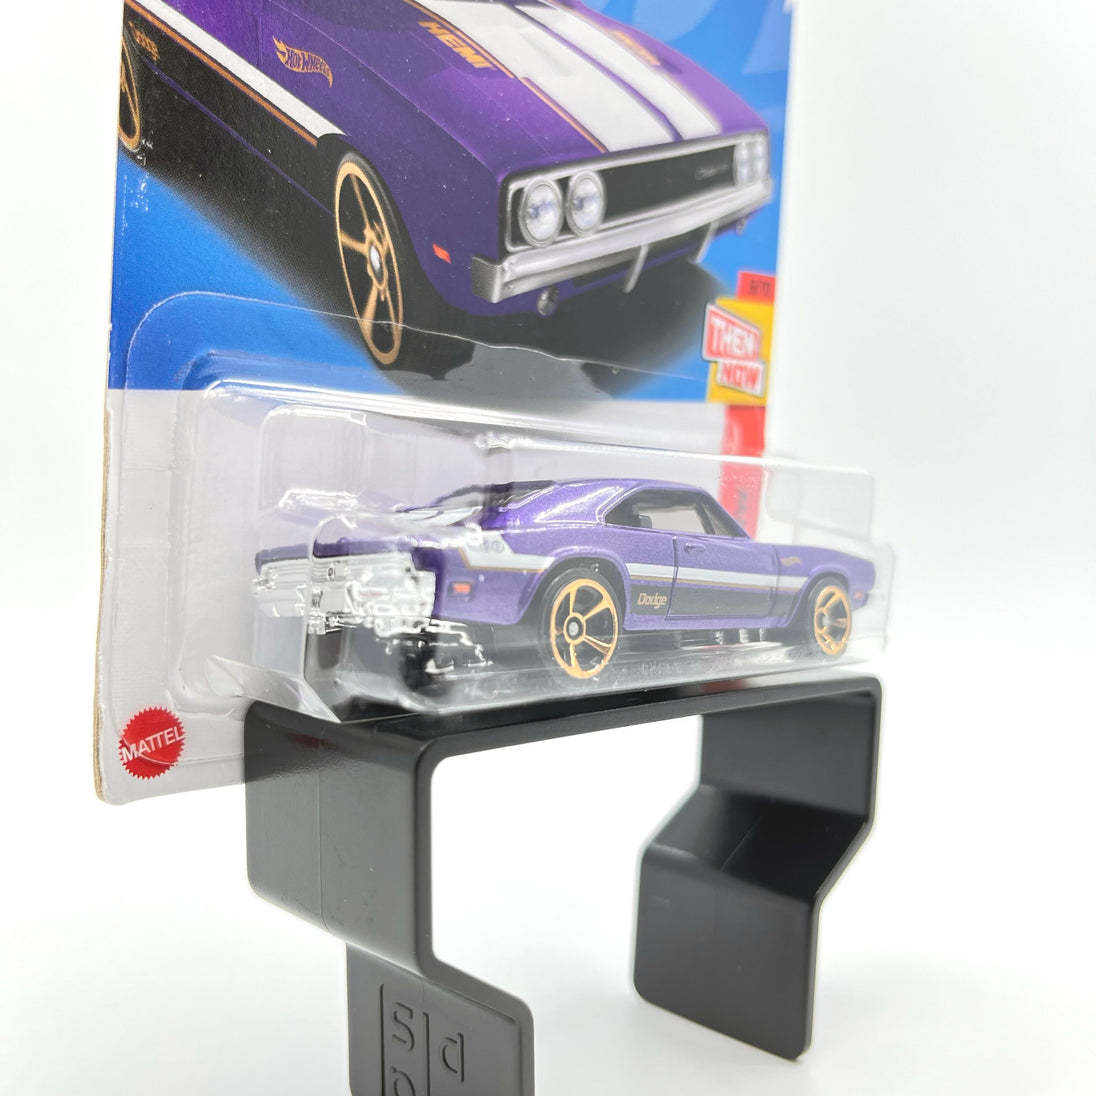 Then And Now- '69 Dodge Charger 500 - Hotwheel 2023